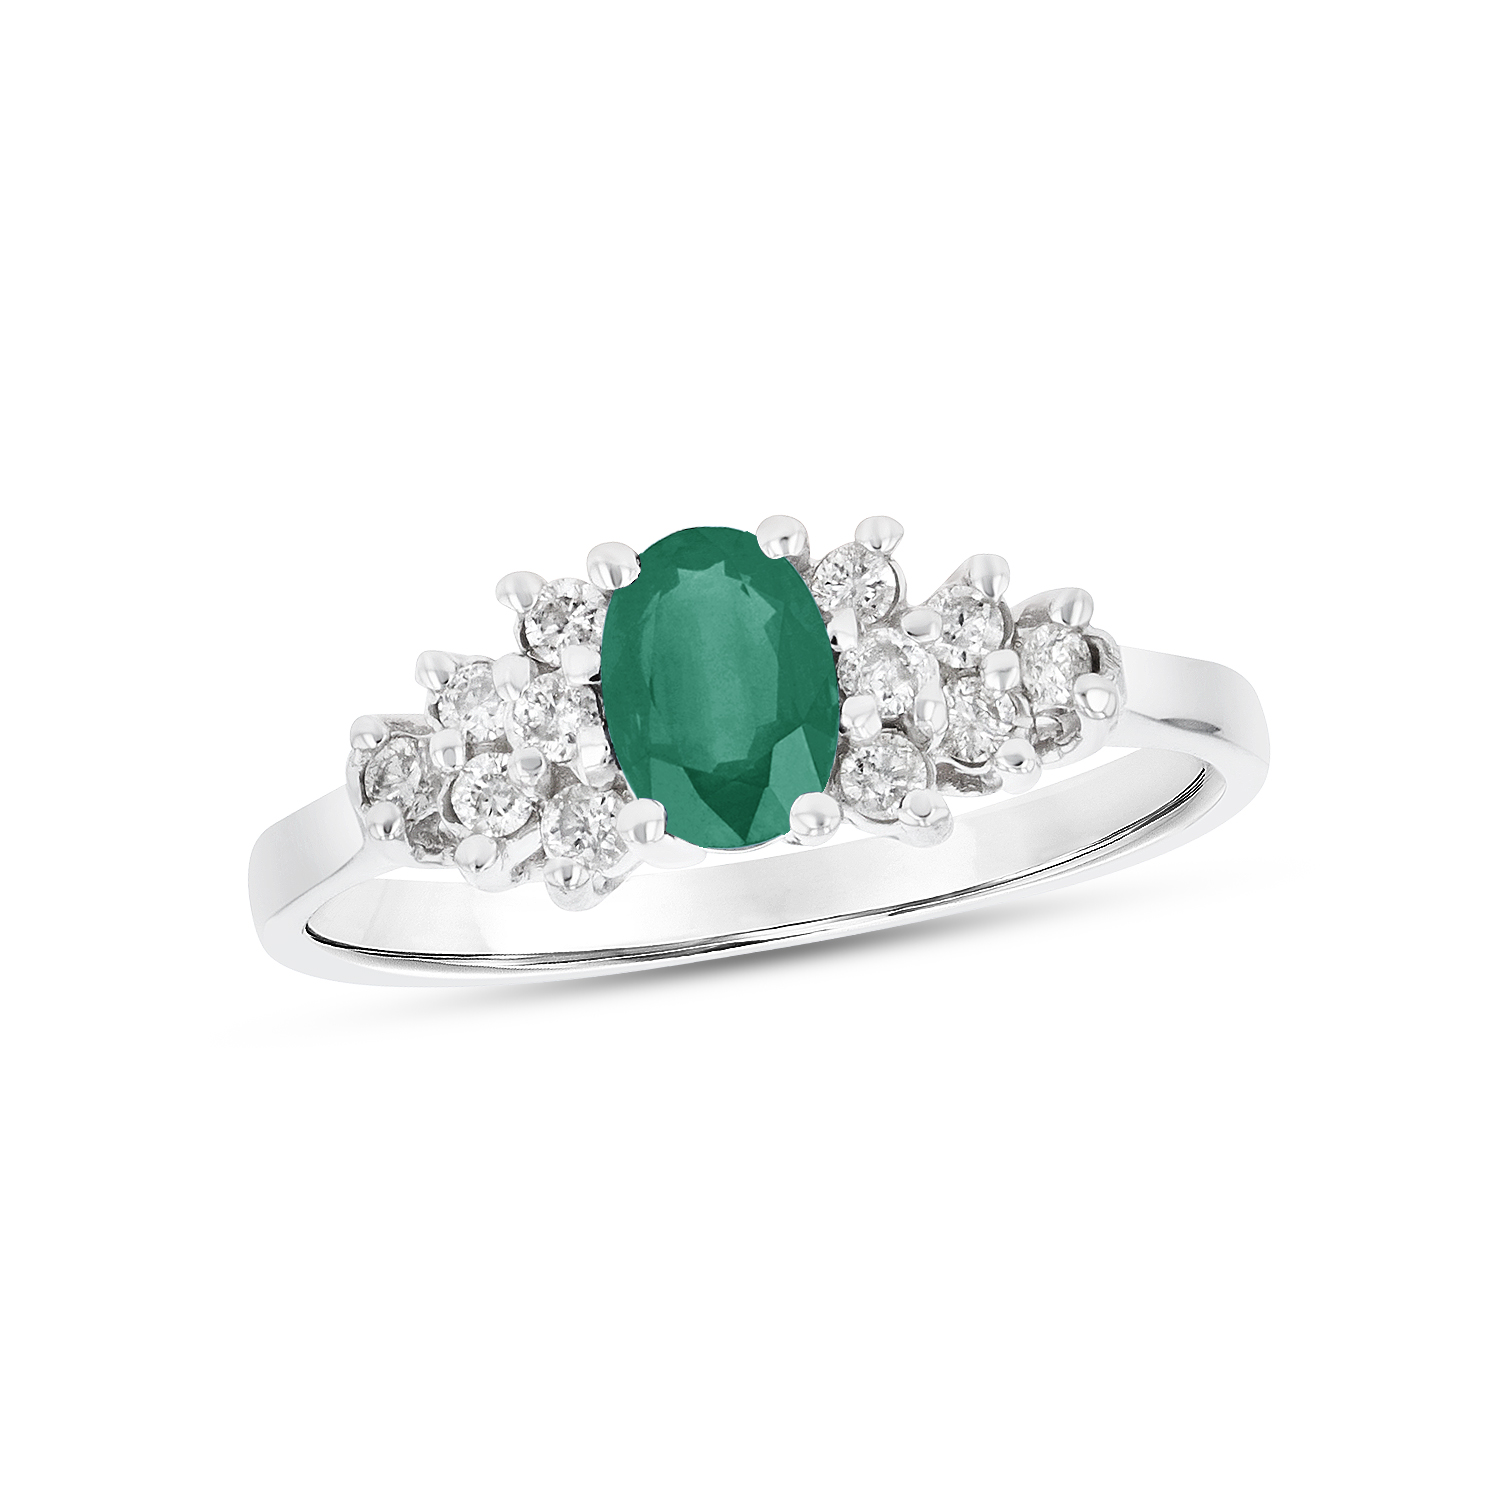 View 0.60ctw Diamond and Emerald Ring in 14k White Gold